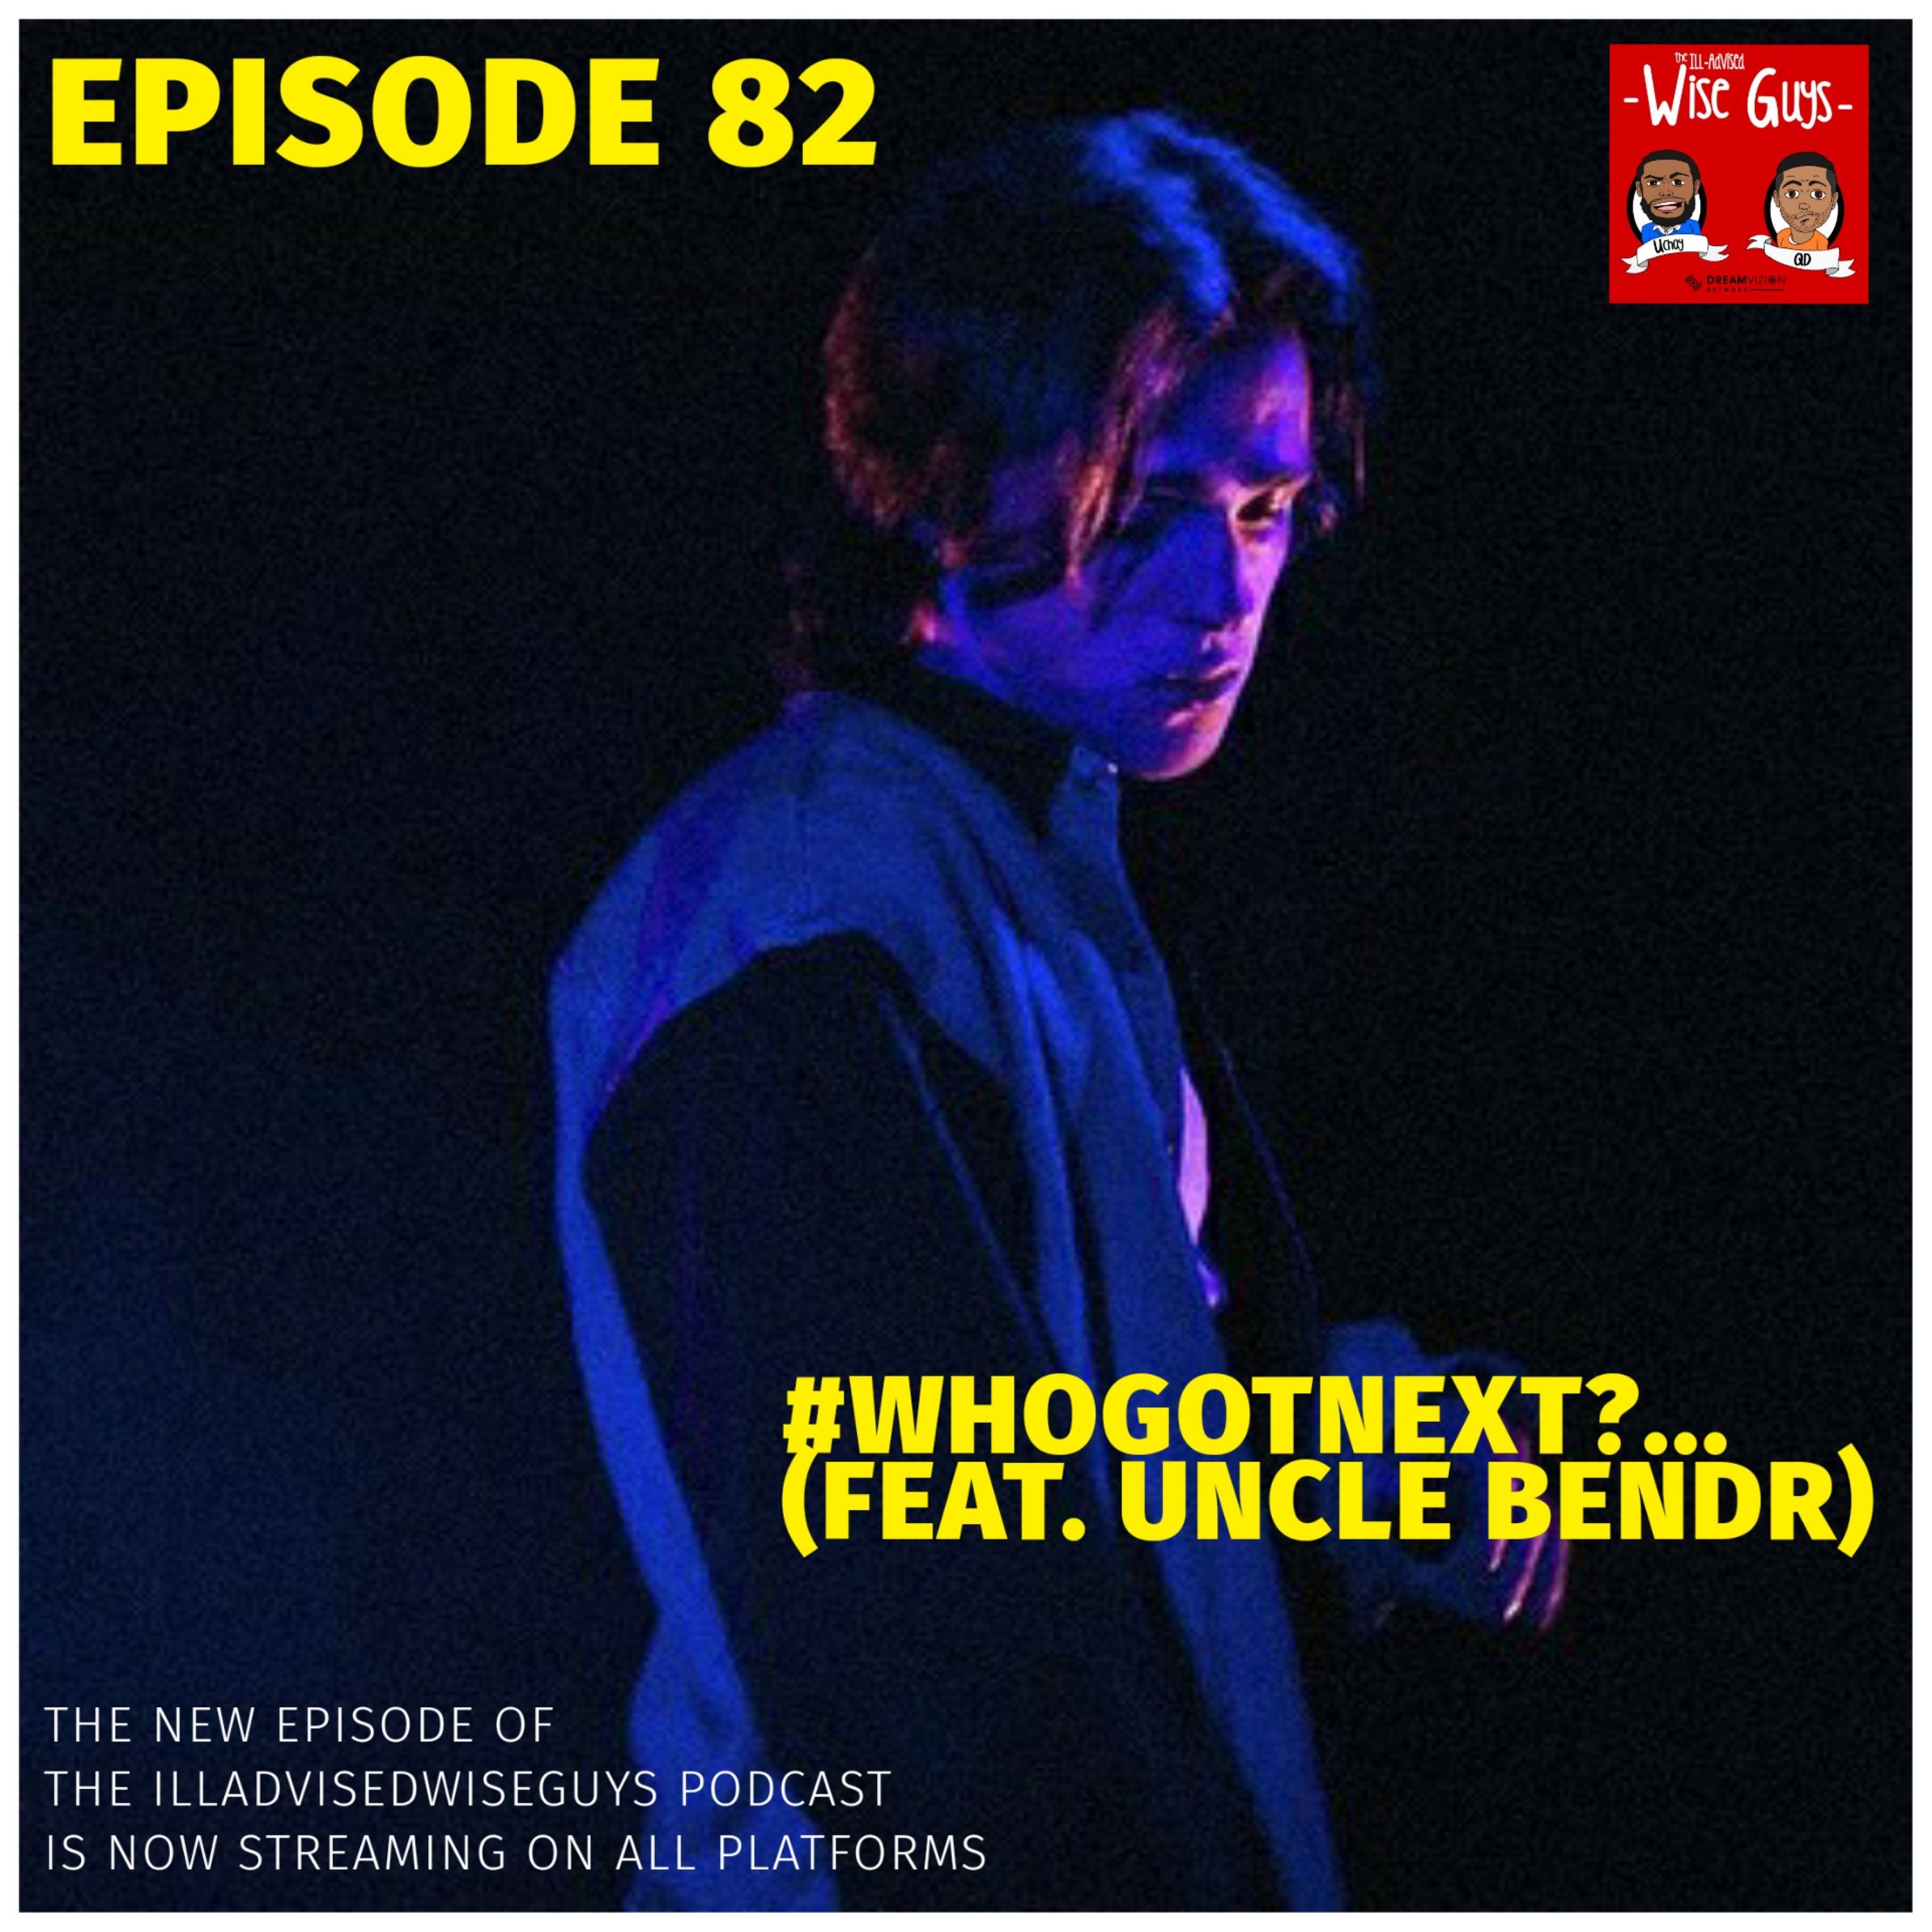 Episode 82 - #WhoGotNext?...(Feat. Uncle Bendr) Image